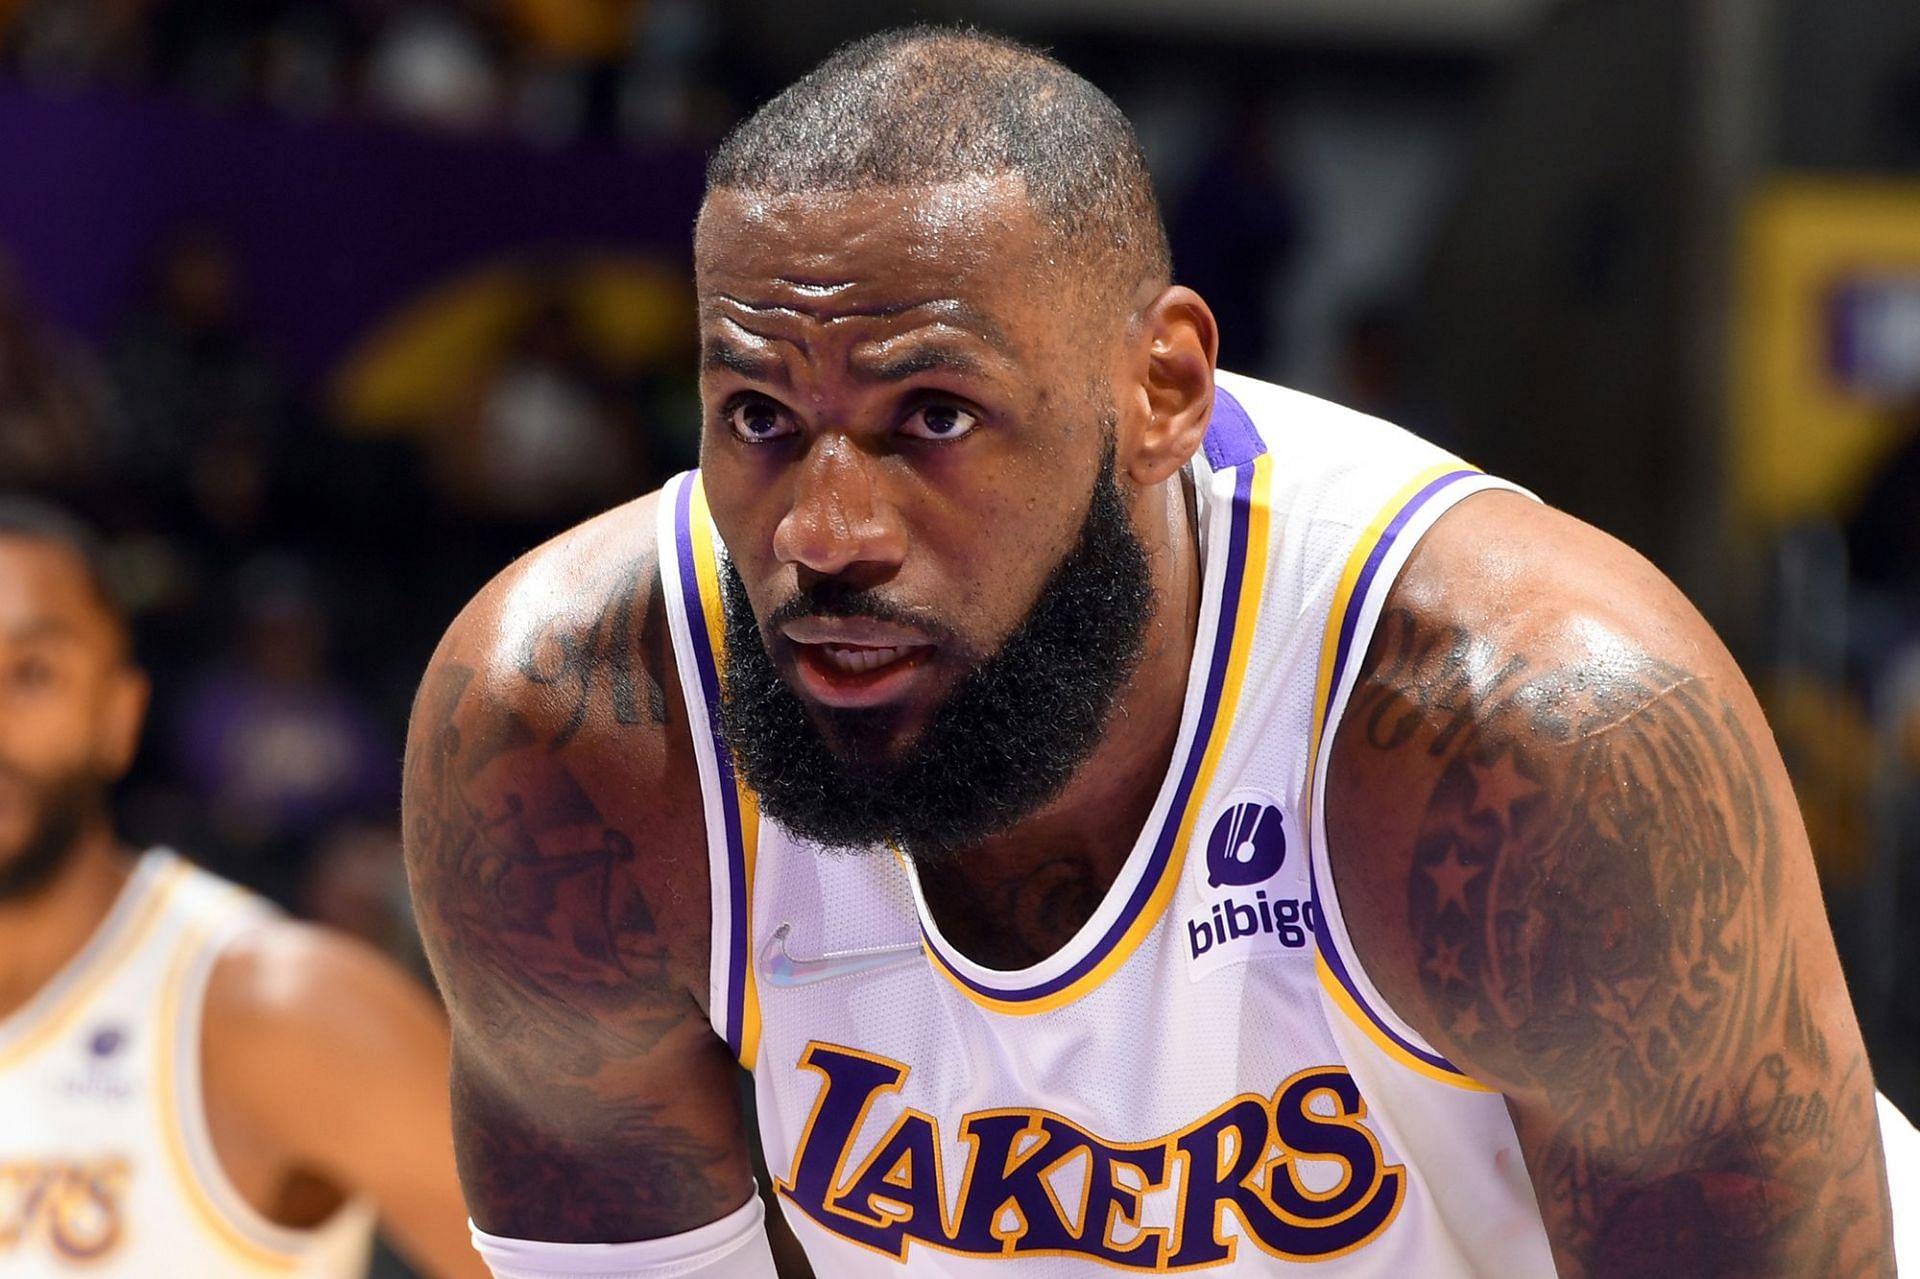 LeBron James will be greatly motivated to prove haters wrong next season. [Photo: New York Post]